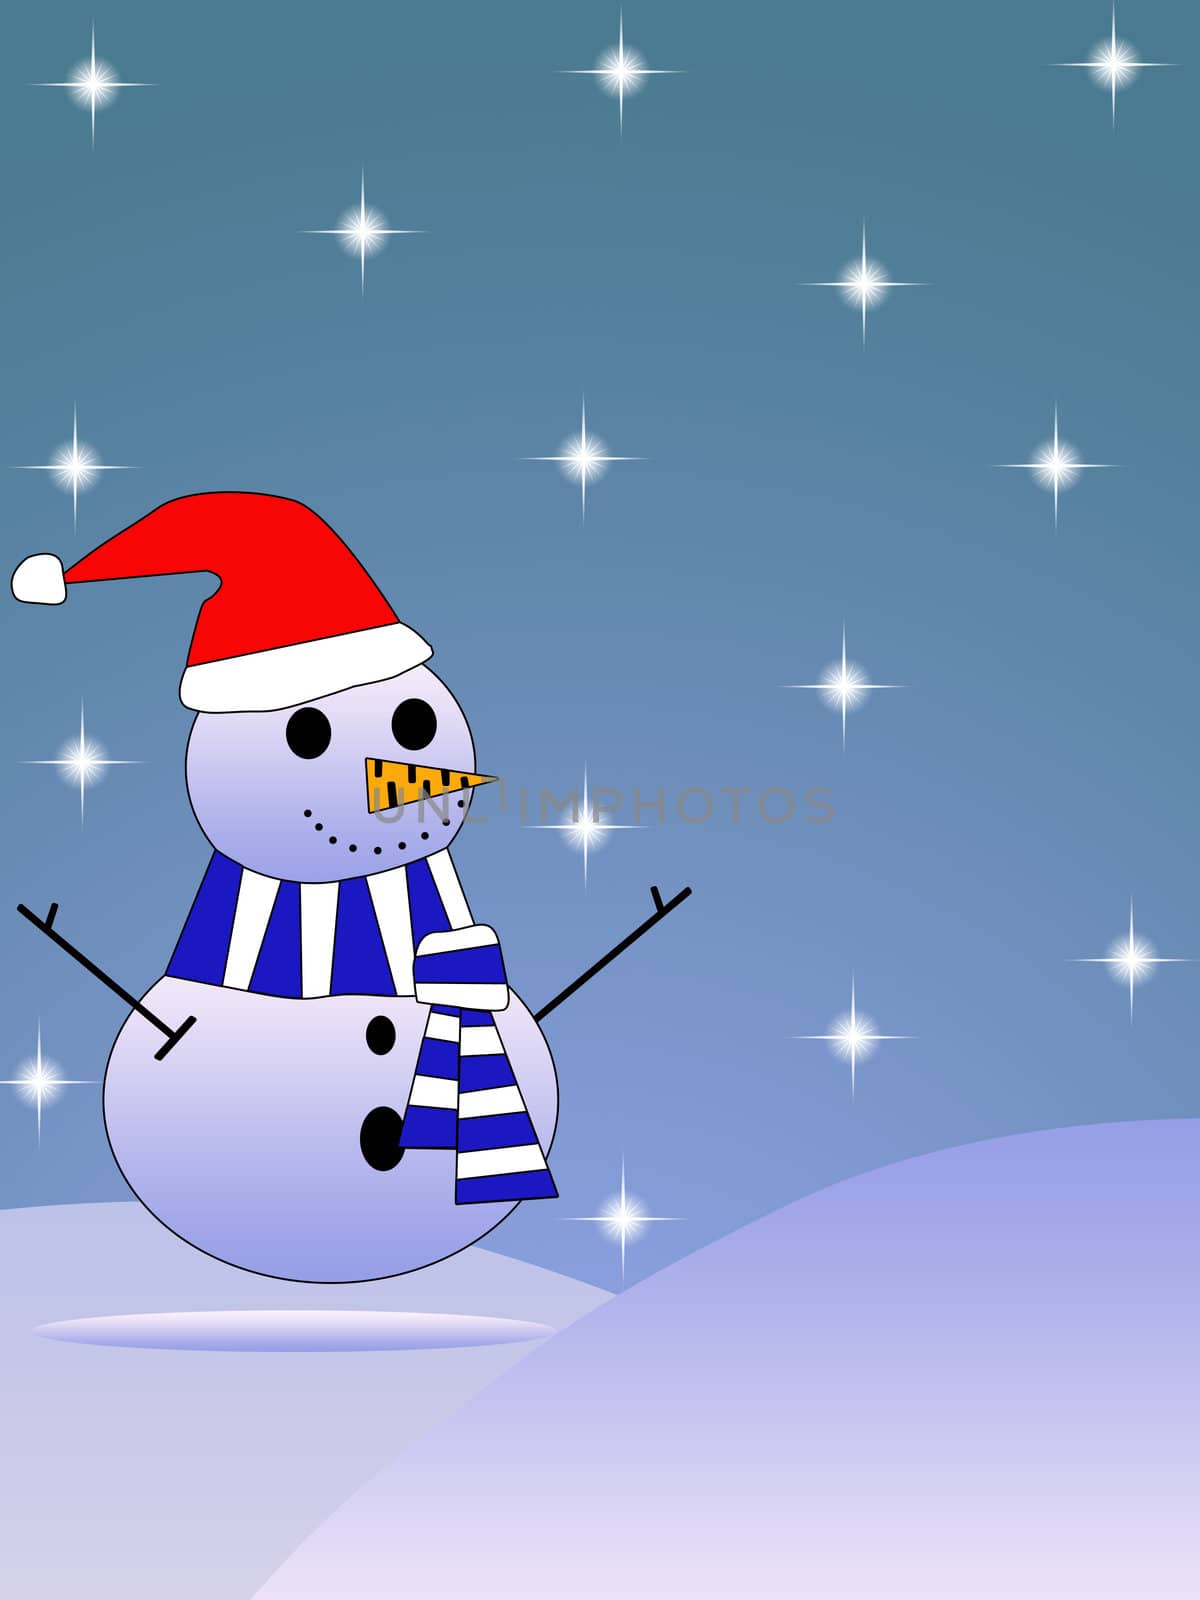 Large snowman dressed in hat and scarf with falling snow